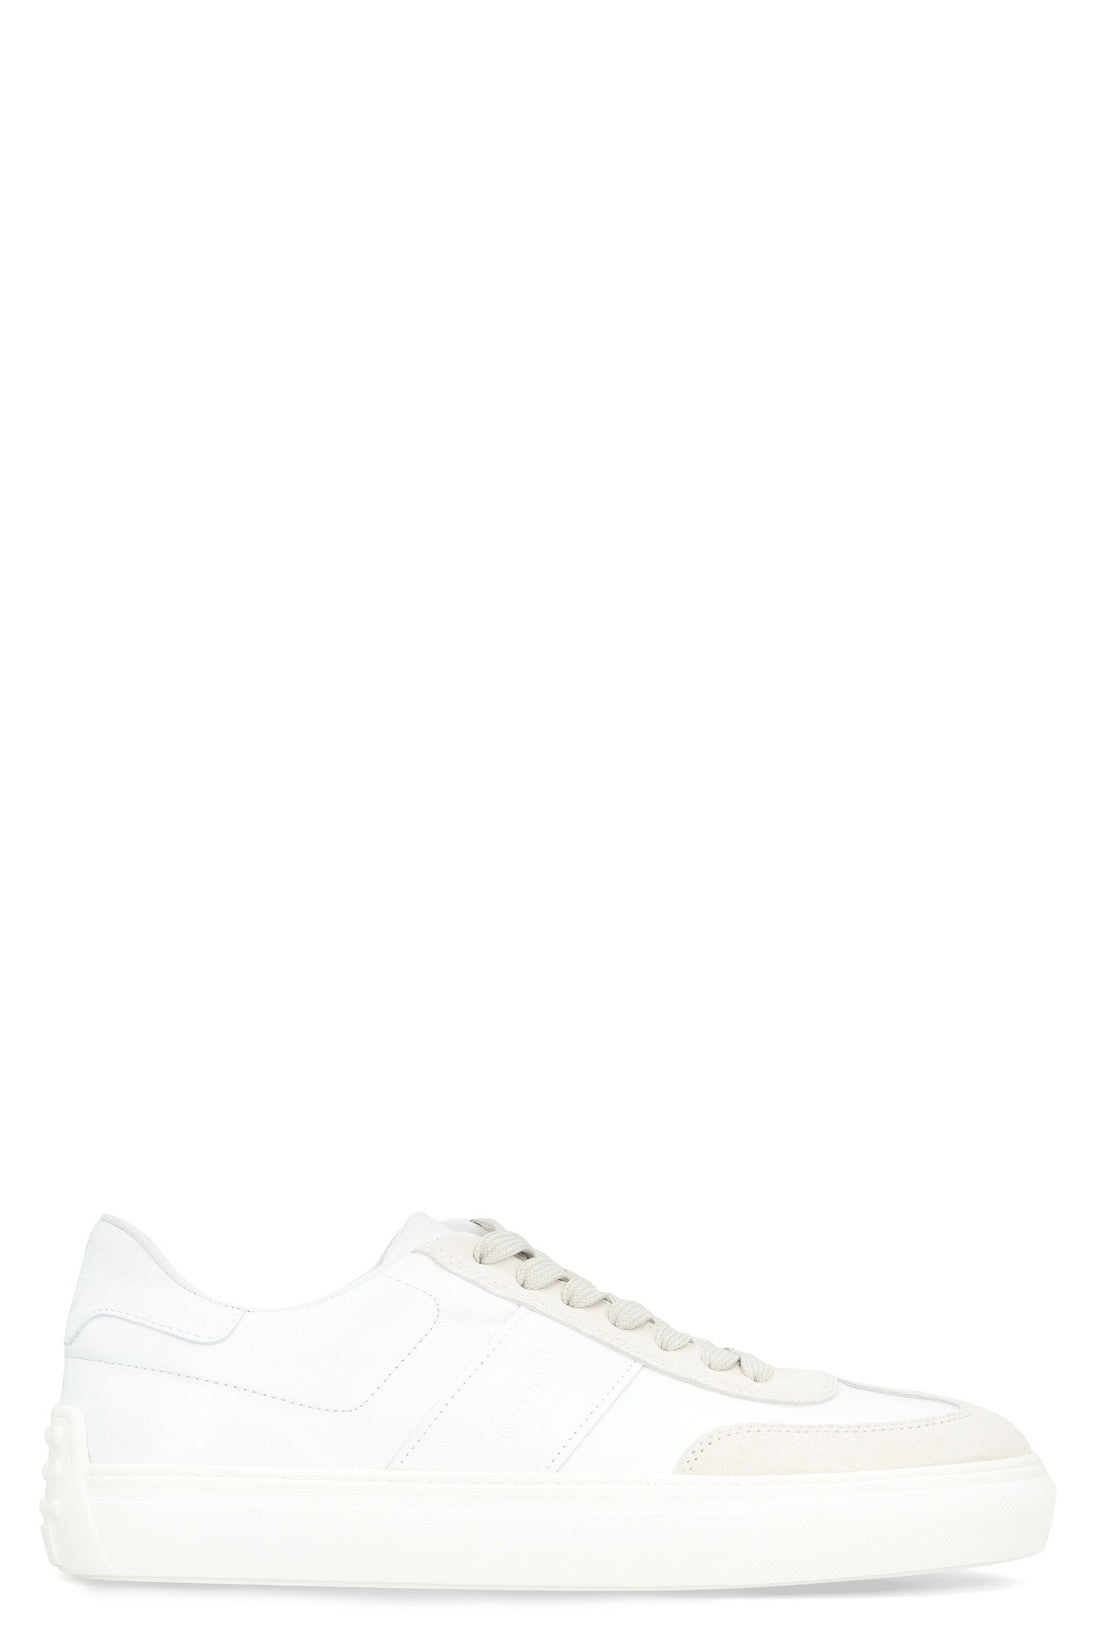 Tod's-OUTLET-SALE-Leather low-top sneakers-ARCHIVIST